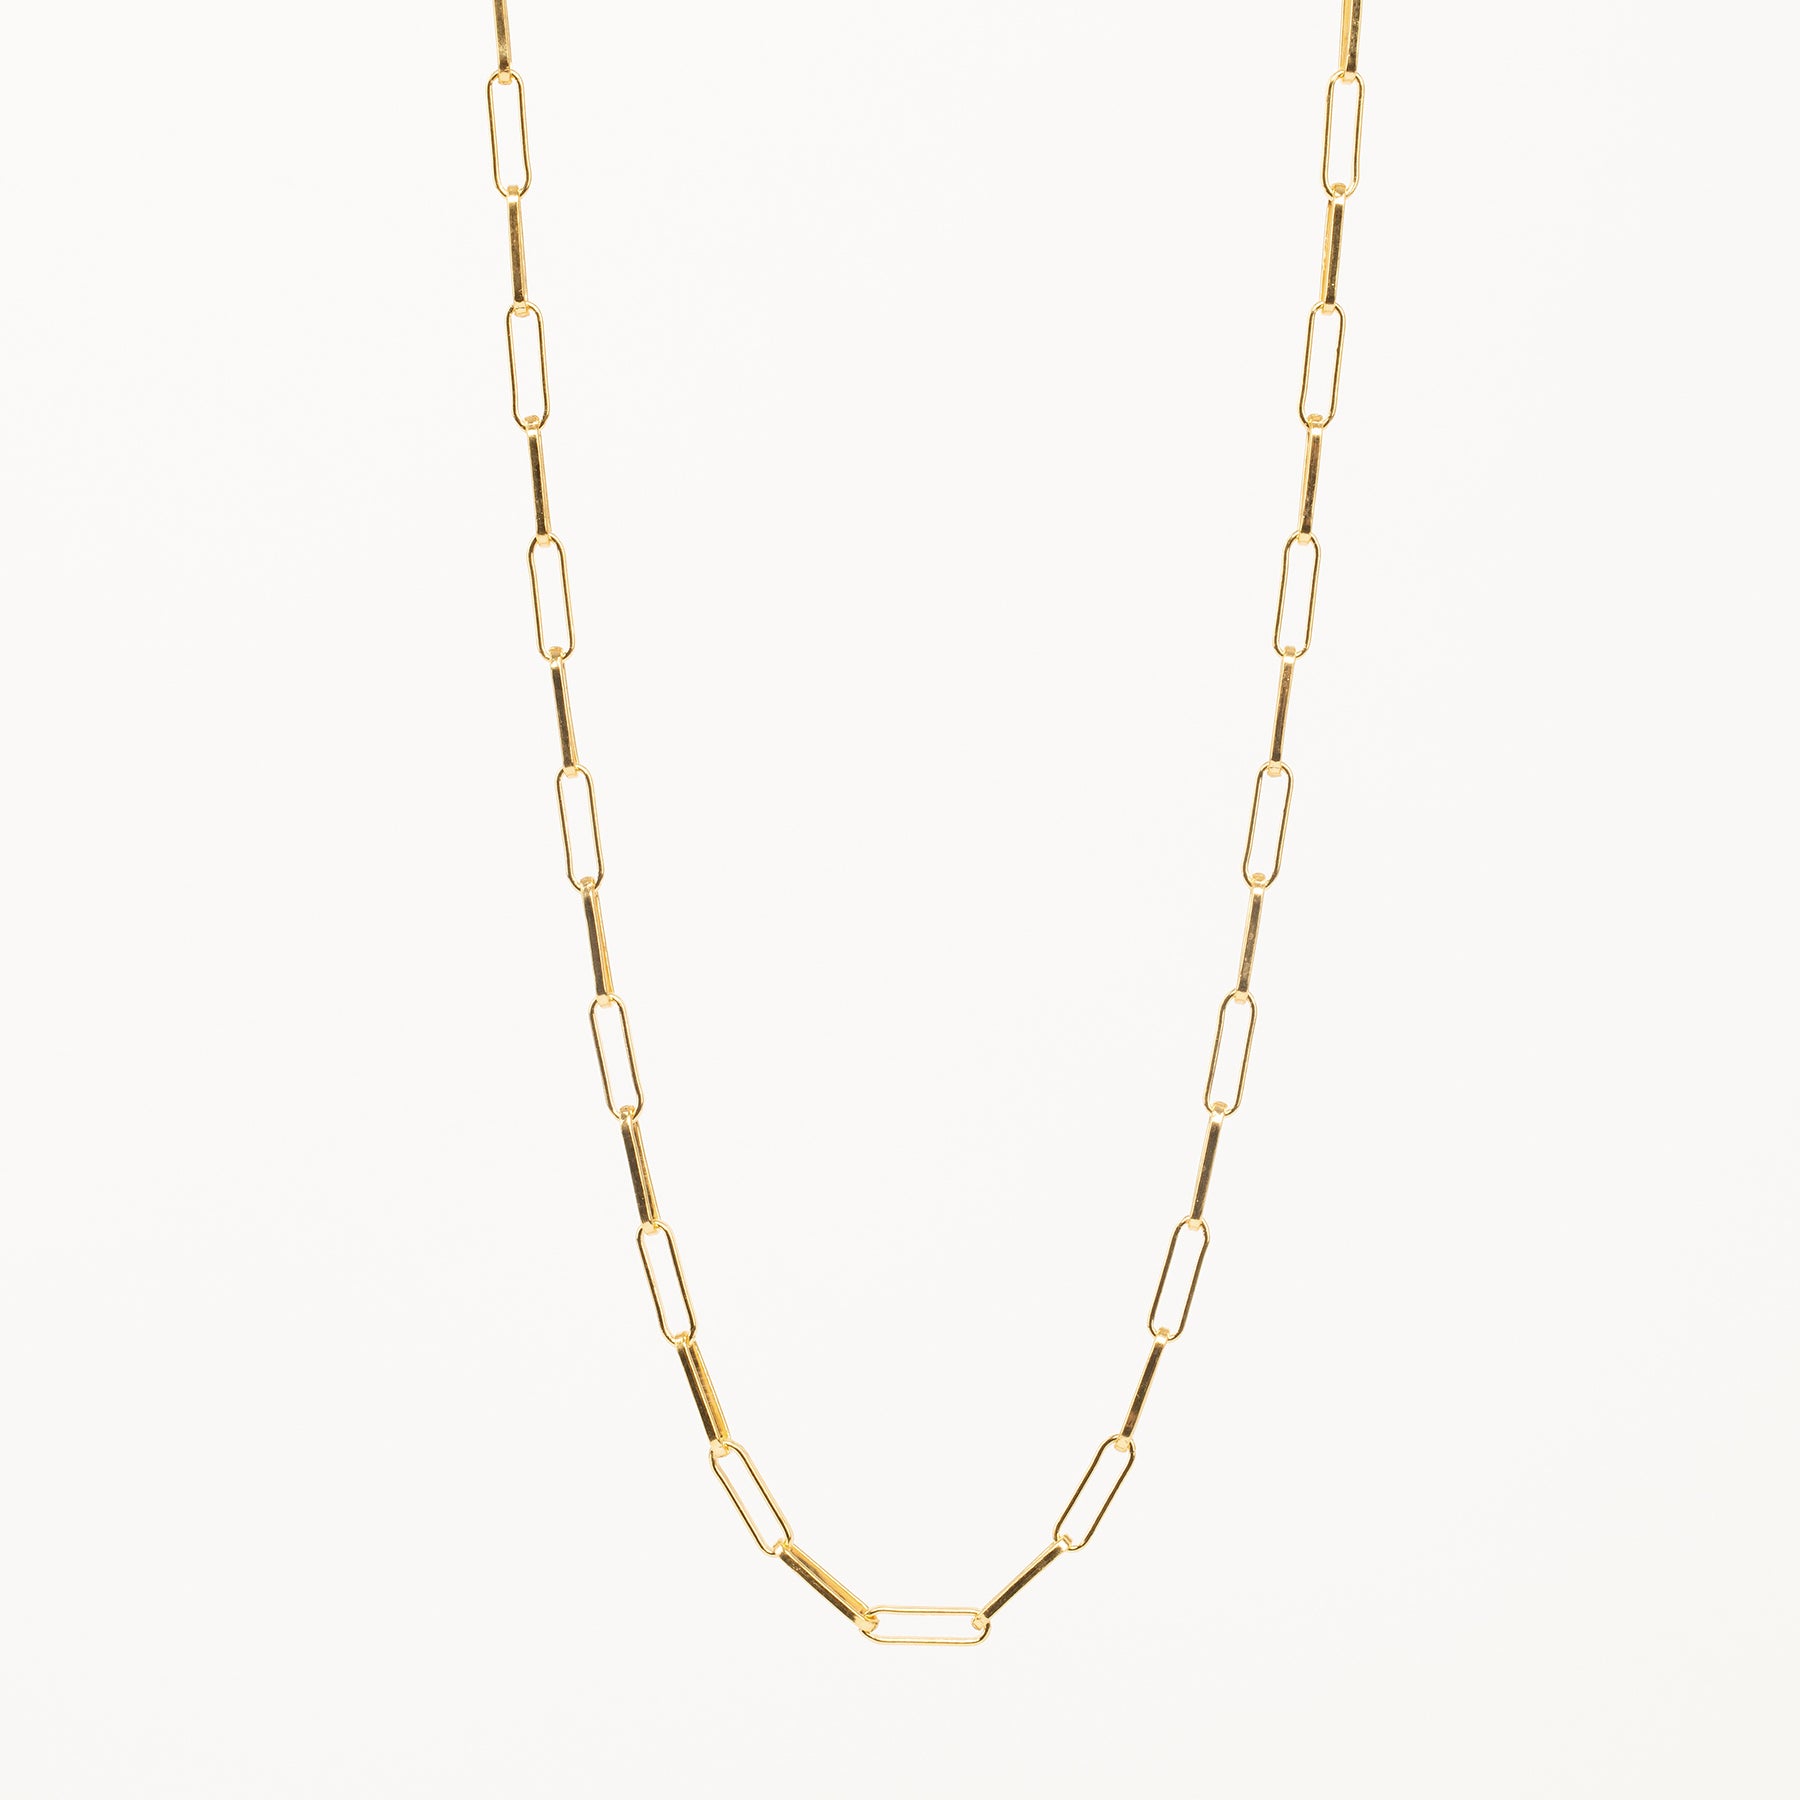 Gwen Beloti Gold Paperclip Layla Gold Chain Link Necklace 1.jpg__PID:ca0c01e8-edc3-461e-b0be-ec4458db7078